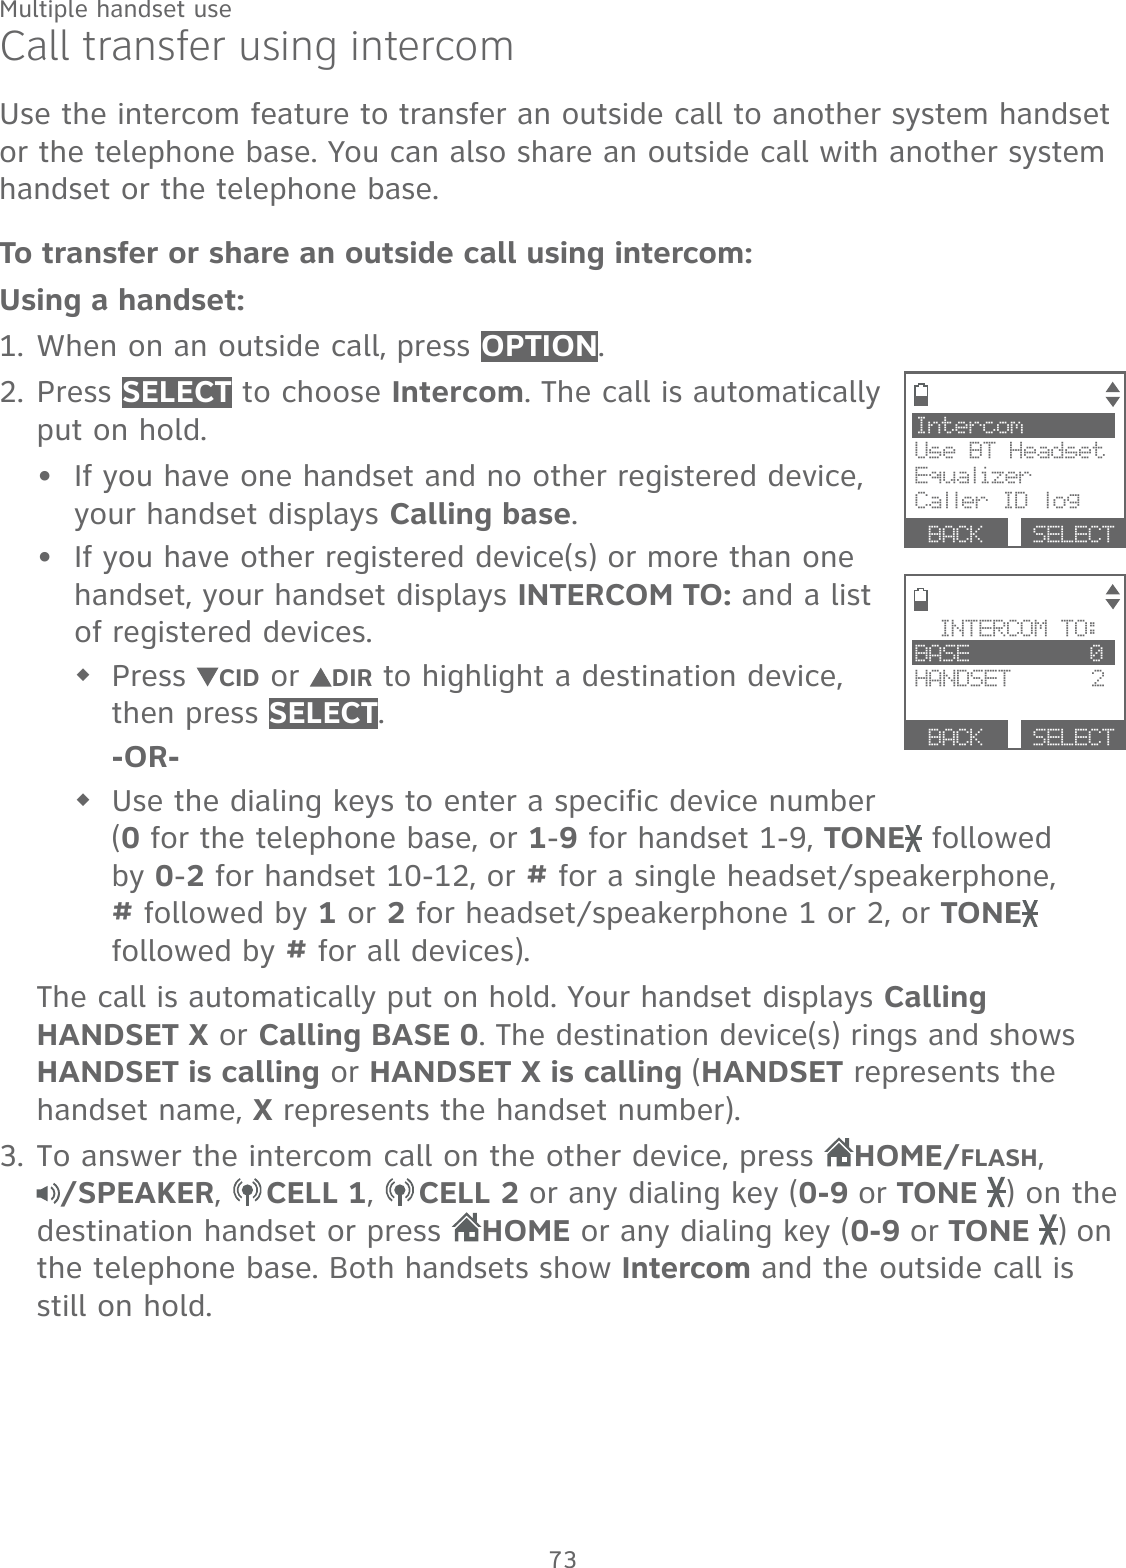 73Multiple handset useCall transfer using intercomUse the intercom feature to transfer an outside call to another system handset or the telephone base. You can also share an outside call with another system handset or the telephone base.To transfer or share an outside call using intercom:Using a handset:When on an outside call, press OPTION.Press SELECT to choose Intercom. The call is automatically put on hold.If you have one handset and no other registered device, your handset displays Calling base. If you have other registered device(s) or more than one handset, your handset displays INTERCOM TO: and a list of registered devices. Press  CID or  DIR to highlight a destination device, then press SELECT. -OR-Use the dialing keys to enter a specific device number  (0 for the telephone base, or 1-9 for handset 1-9, TONE  followed by 0-2 for handset 10-12, or # for a single headset/speakerphone, # followed by 1 or 2 for headset/speakerphone 1 or 2, or TONE  followed by # for all devices).The call is automatically put on hold. Your handset displays Calling HANDSET X or Calling BASE 0. The destination device(s) rings and shows HANDSET is calling or HANDSET X is calling (HANDSET represents the handset name, X represents the handset number).To answer the intercom call on the other device, press HOME/FLASH,  /SPEAKER,  CELL 1,  CELL 2 or any dialing key (0-9 or TONE  ) on the destination handset or press HOME or any dialing key (0-9 or TONE  ) on the telephone base. Both handsets show Intercom and the outside call is still on hold.1.2.••3.IntercomUse BT HeadsetEqualizerCaller ID log BACK  SELECTINTERCOM TO:BASE         0HANDSET      2 BACK  SELECT